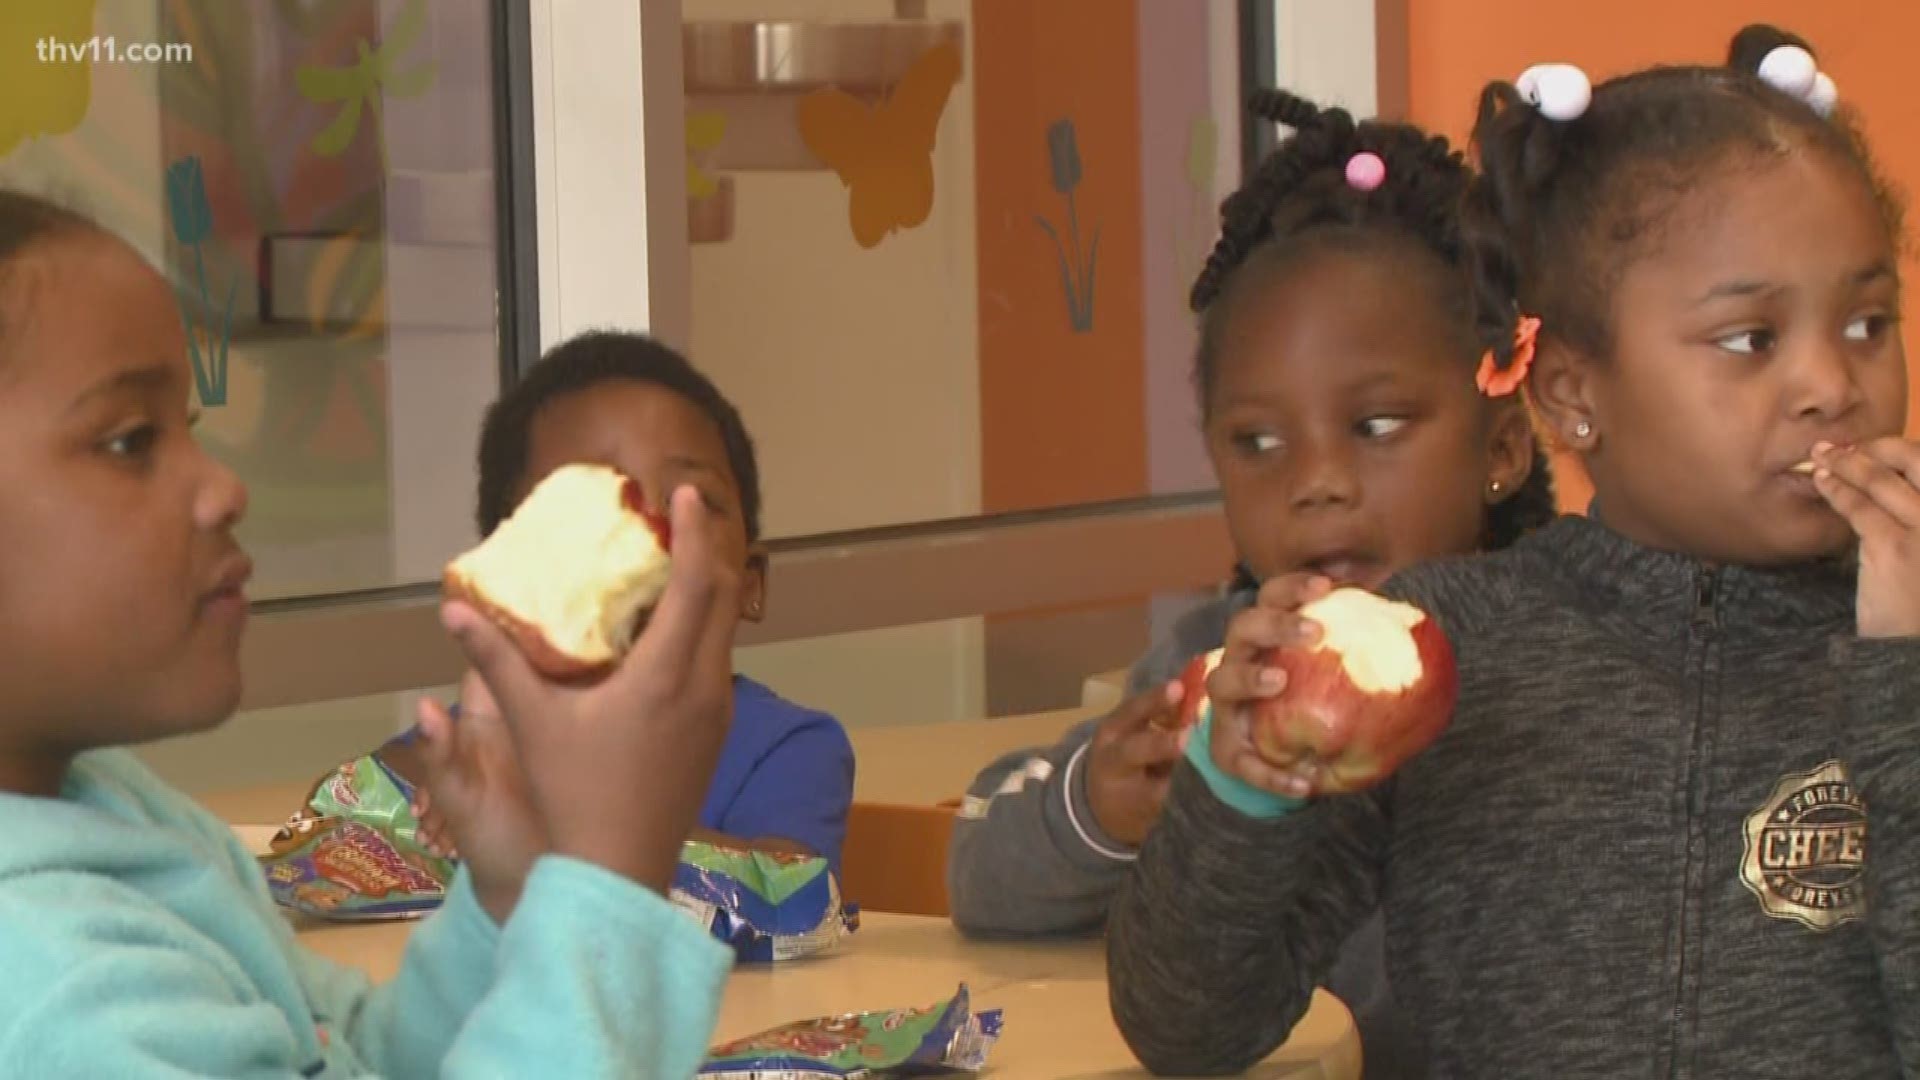 When school is out, some families struggle to put enough food on the table for their kids. A program in Little Rock wants to ease that burden during this week's spring break.